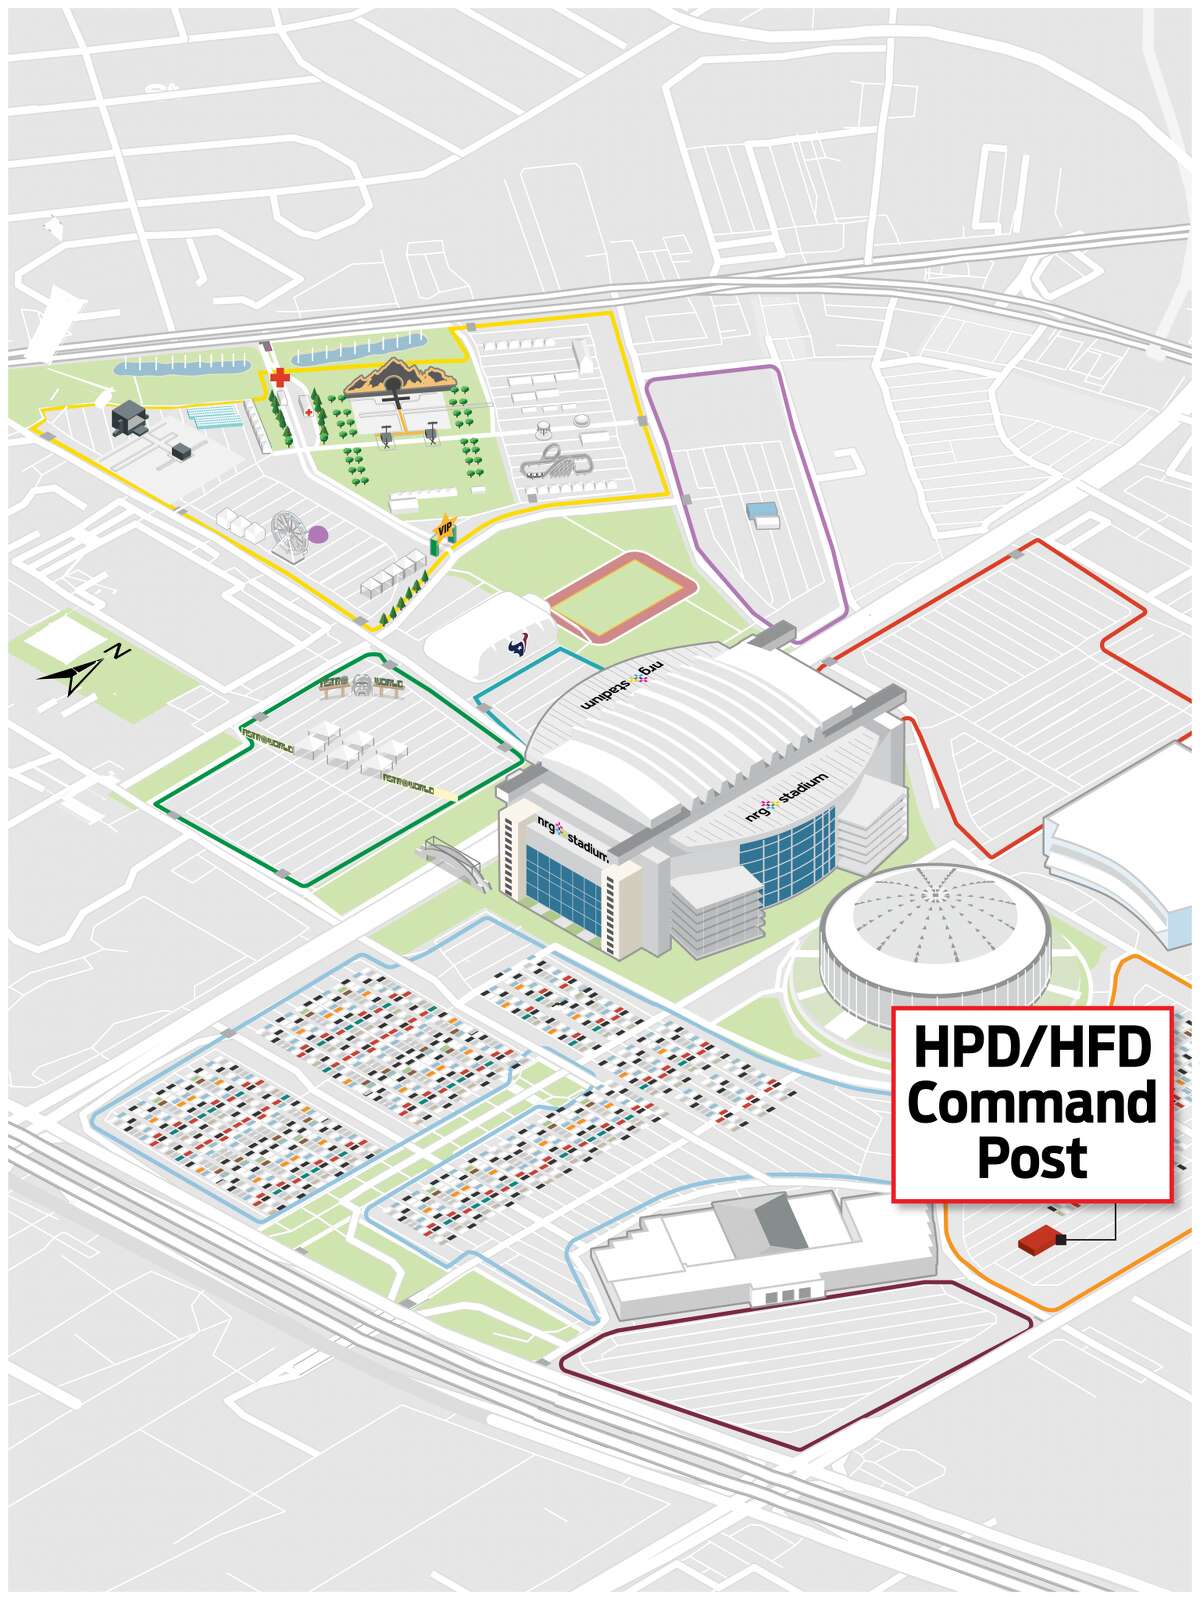 Illustration of full layout of Astroworld with HPD and HFD post highlighted